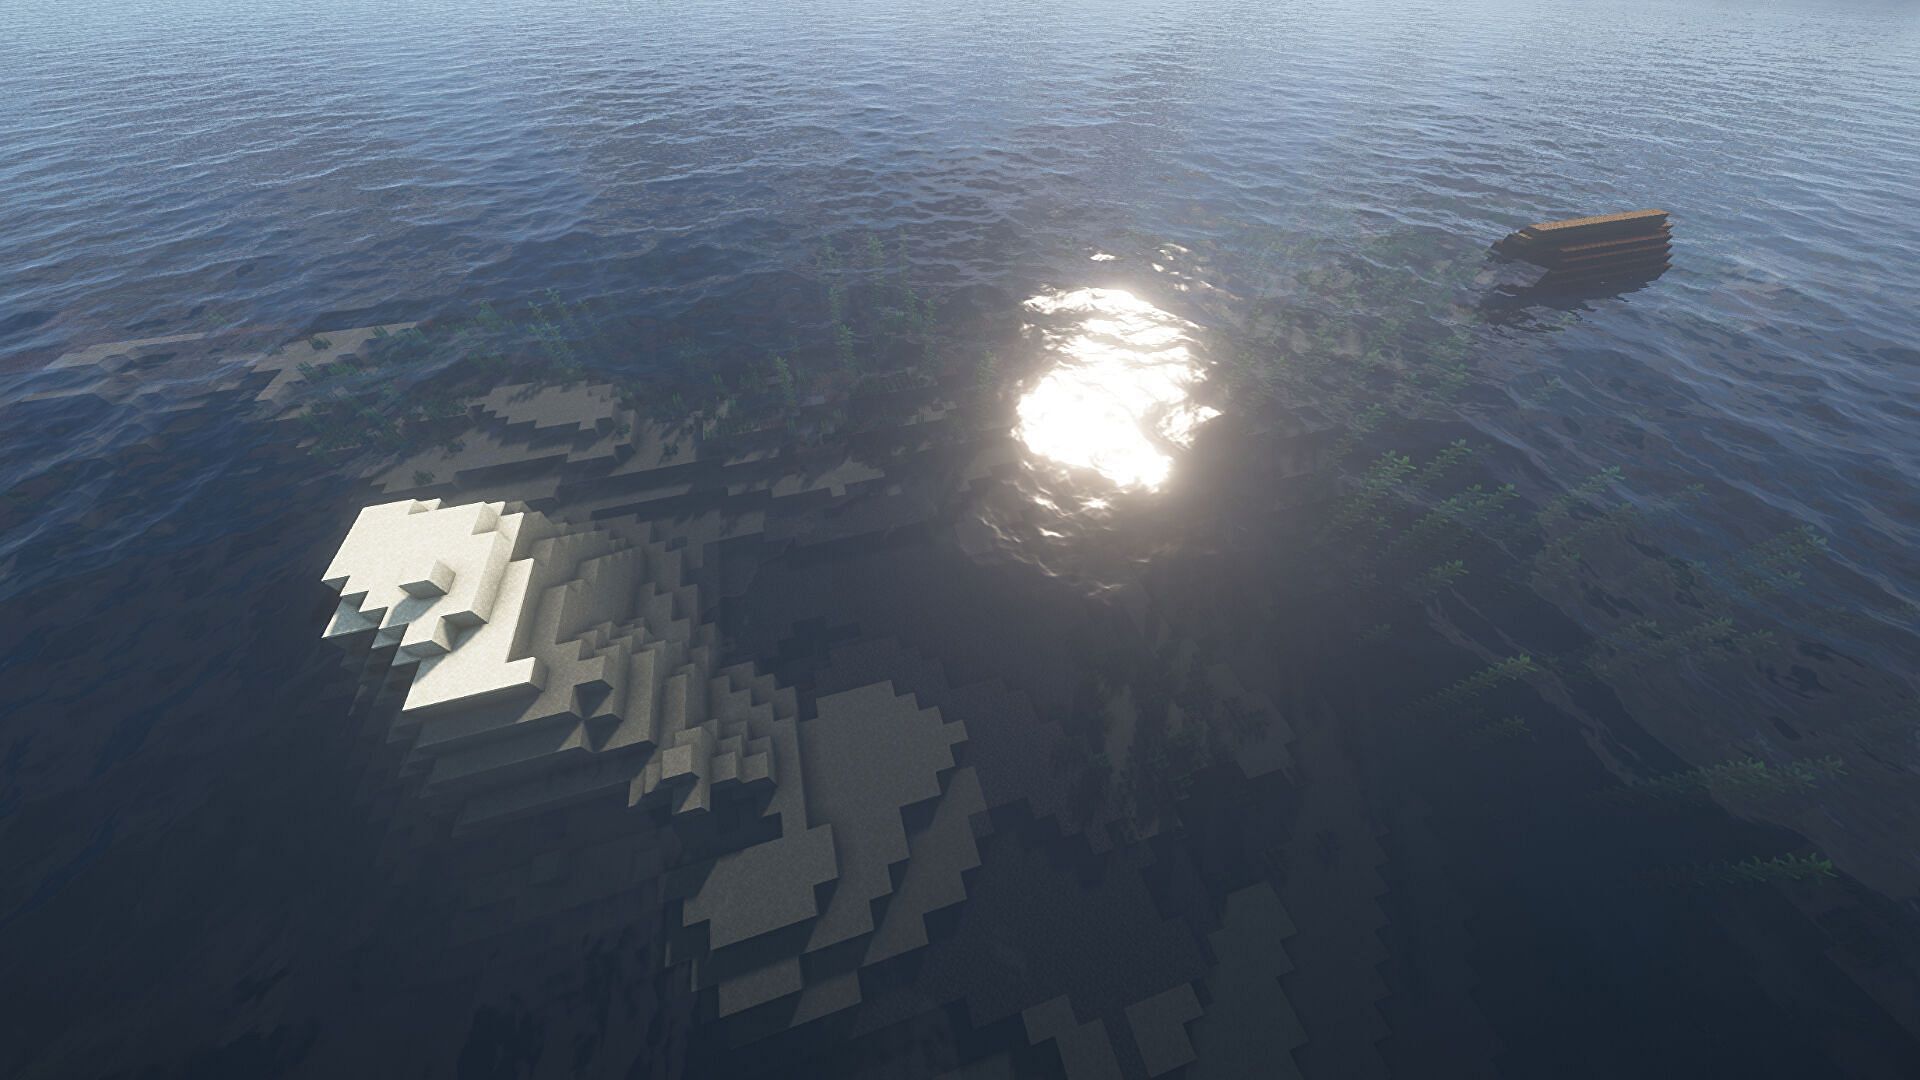 Players will feel a little isolated in this Minecraft seed (Image via Mojang)